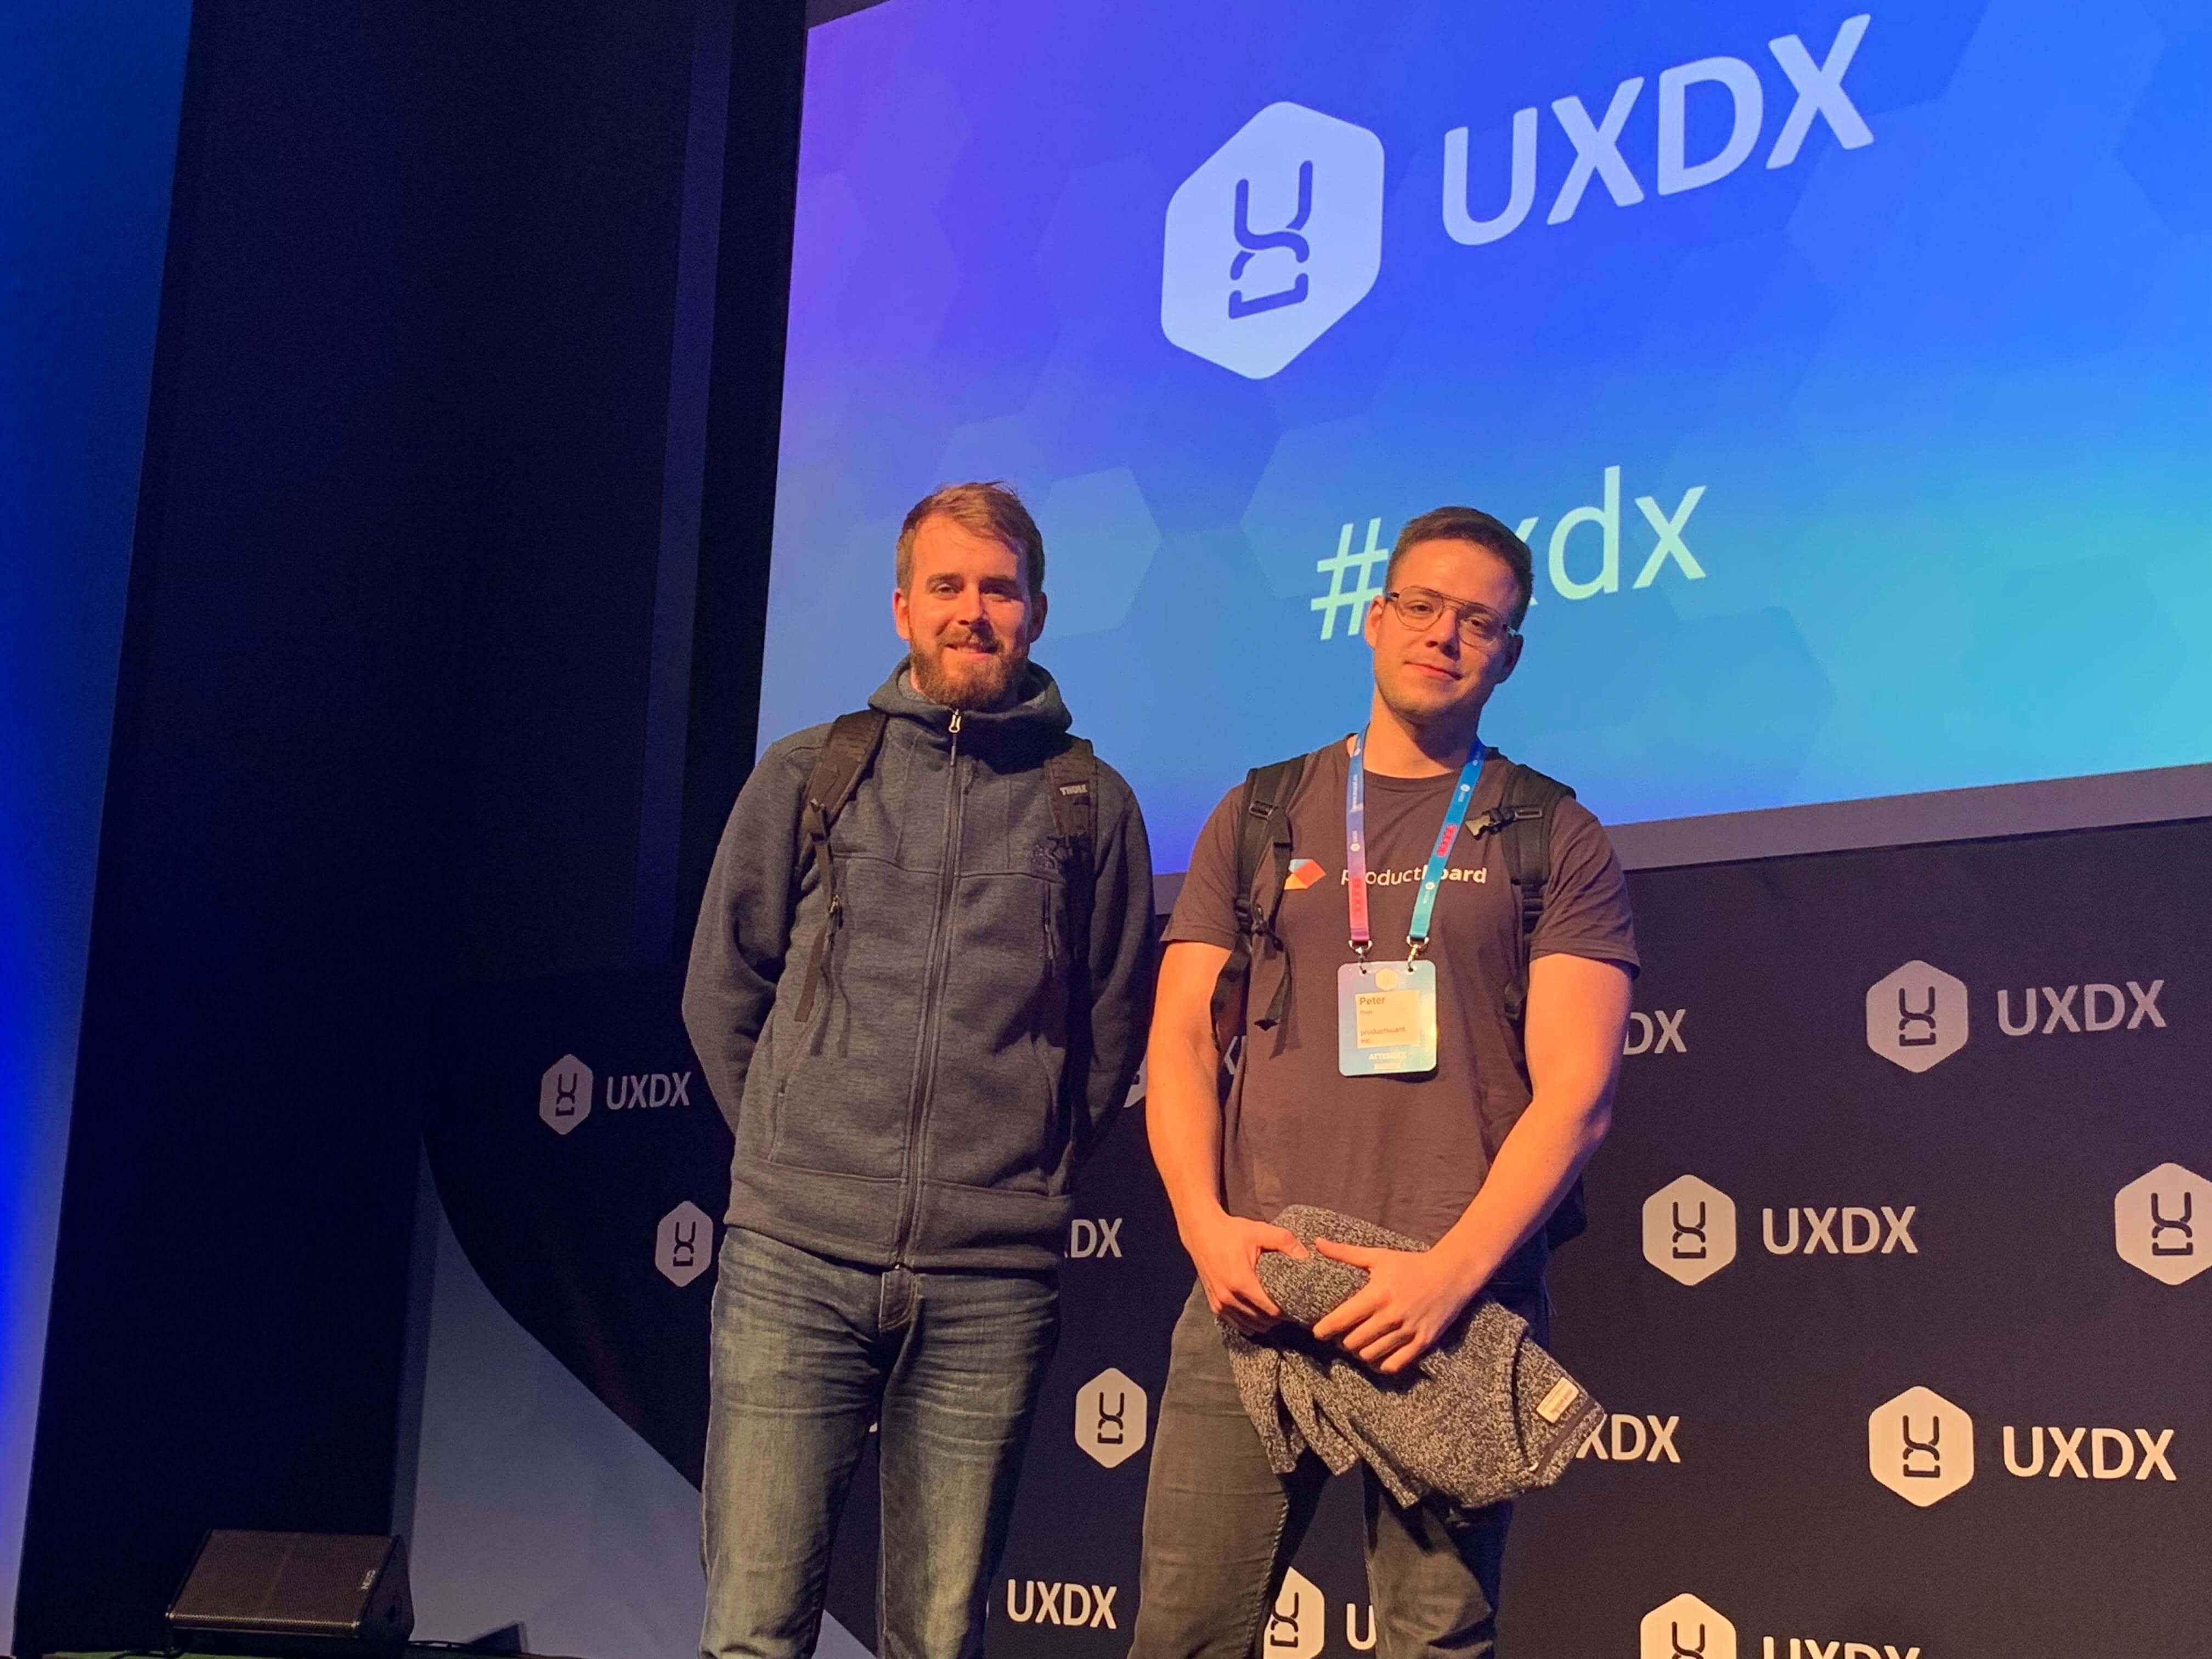 UXDX Conference